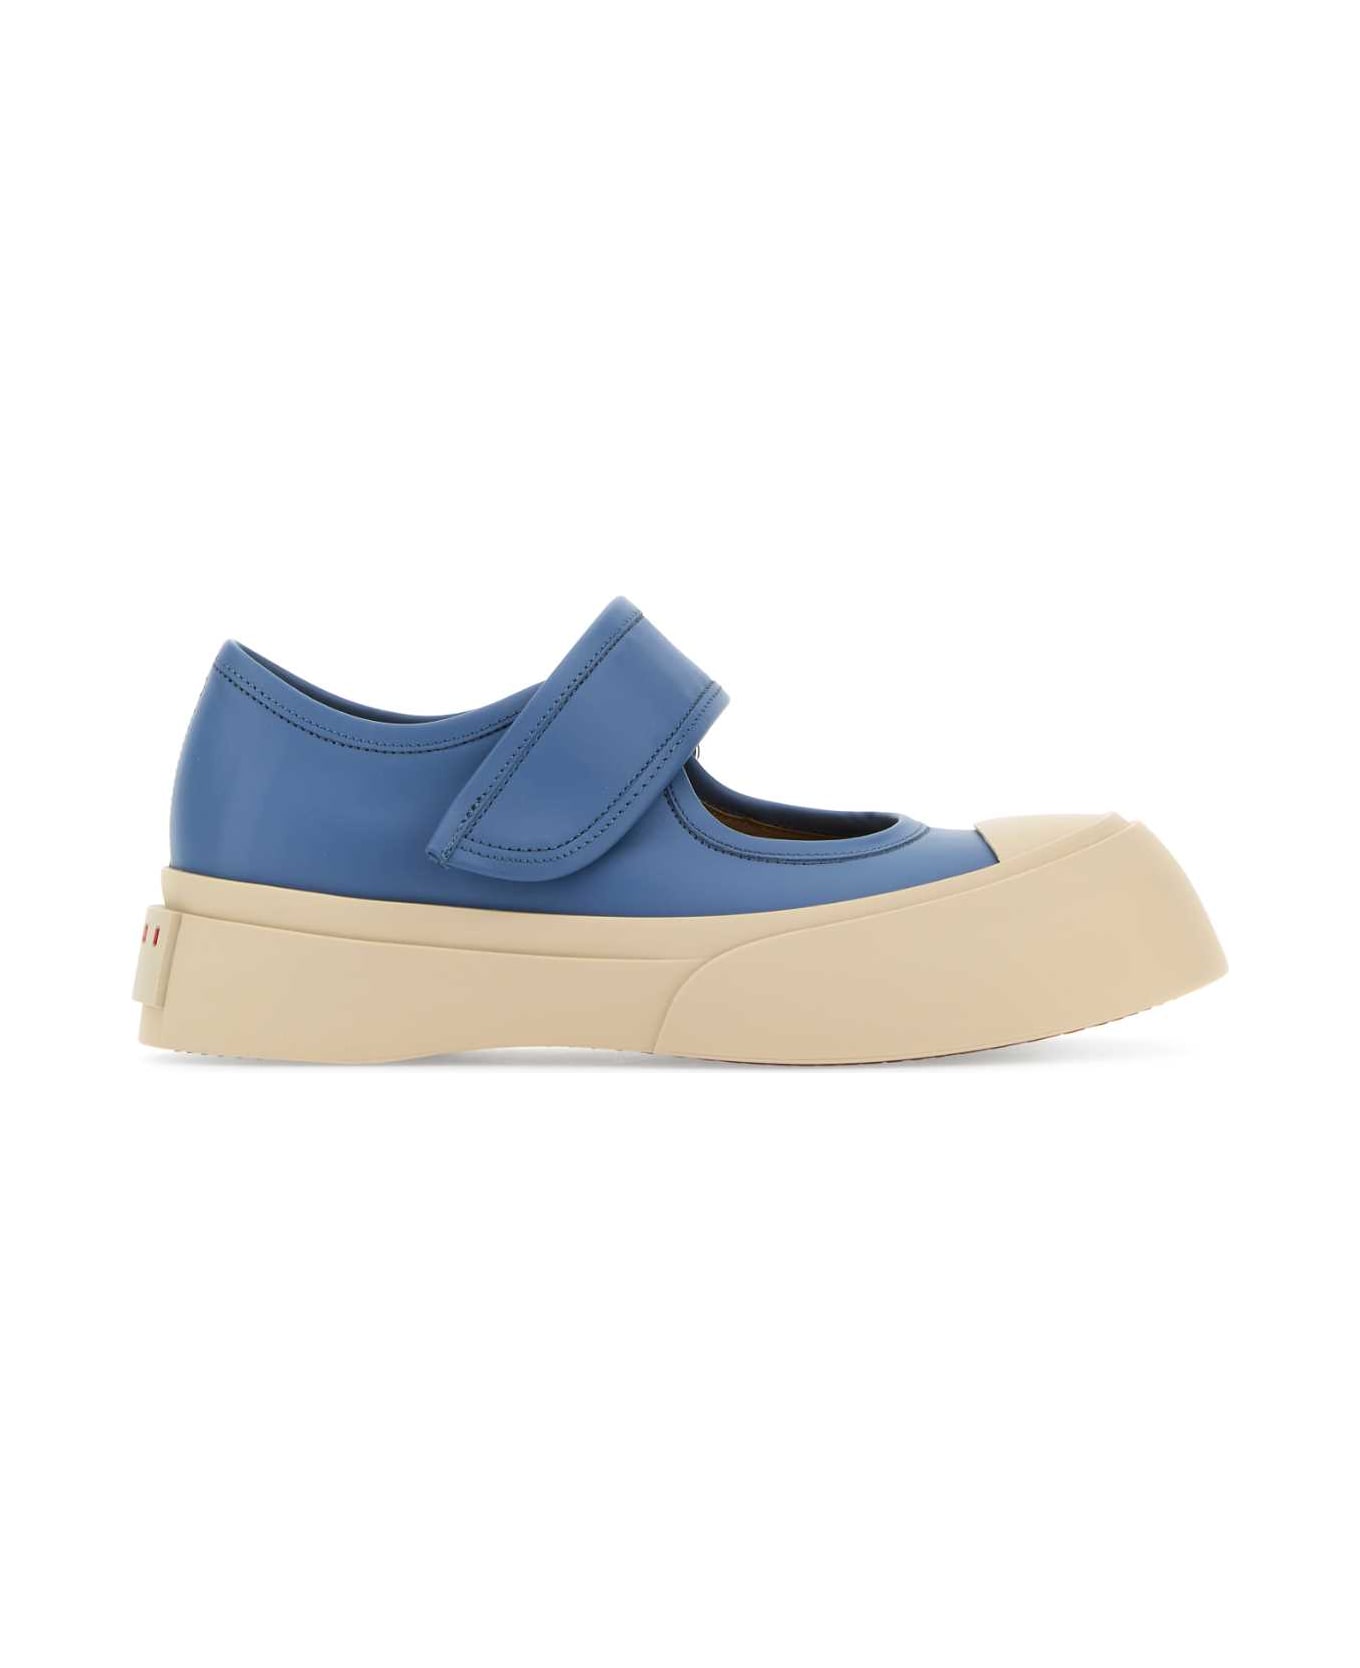 Marni Air Force Blue Leather Mary Jane Sneakers - 00B37 ウェッジシューズ